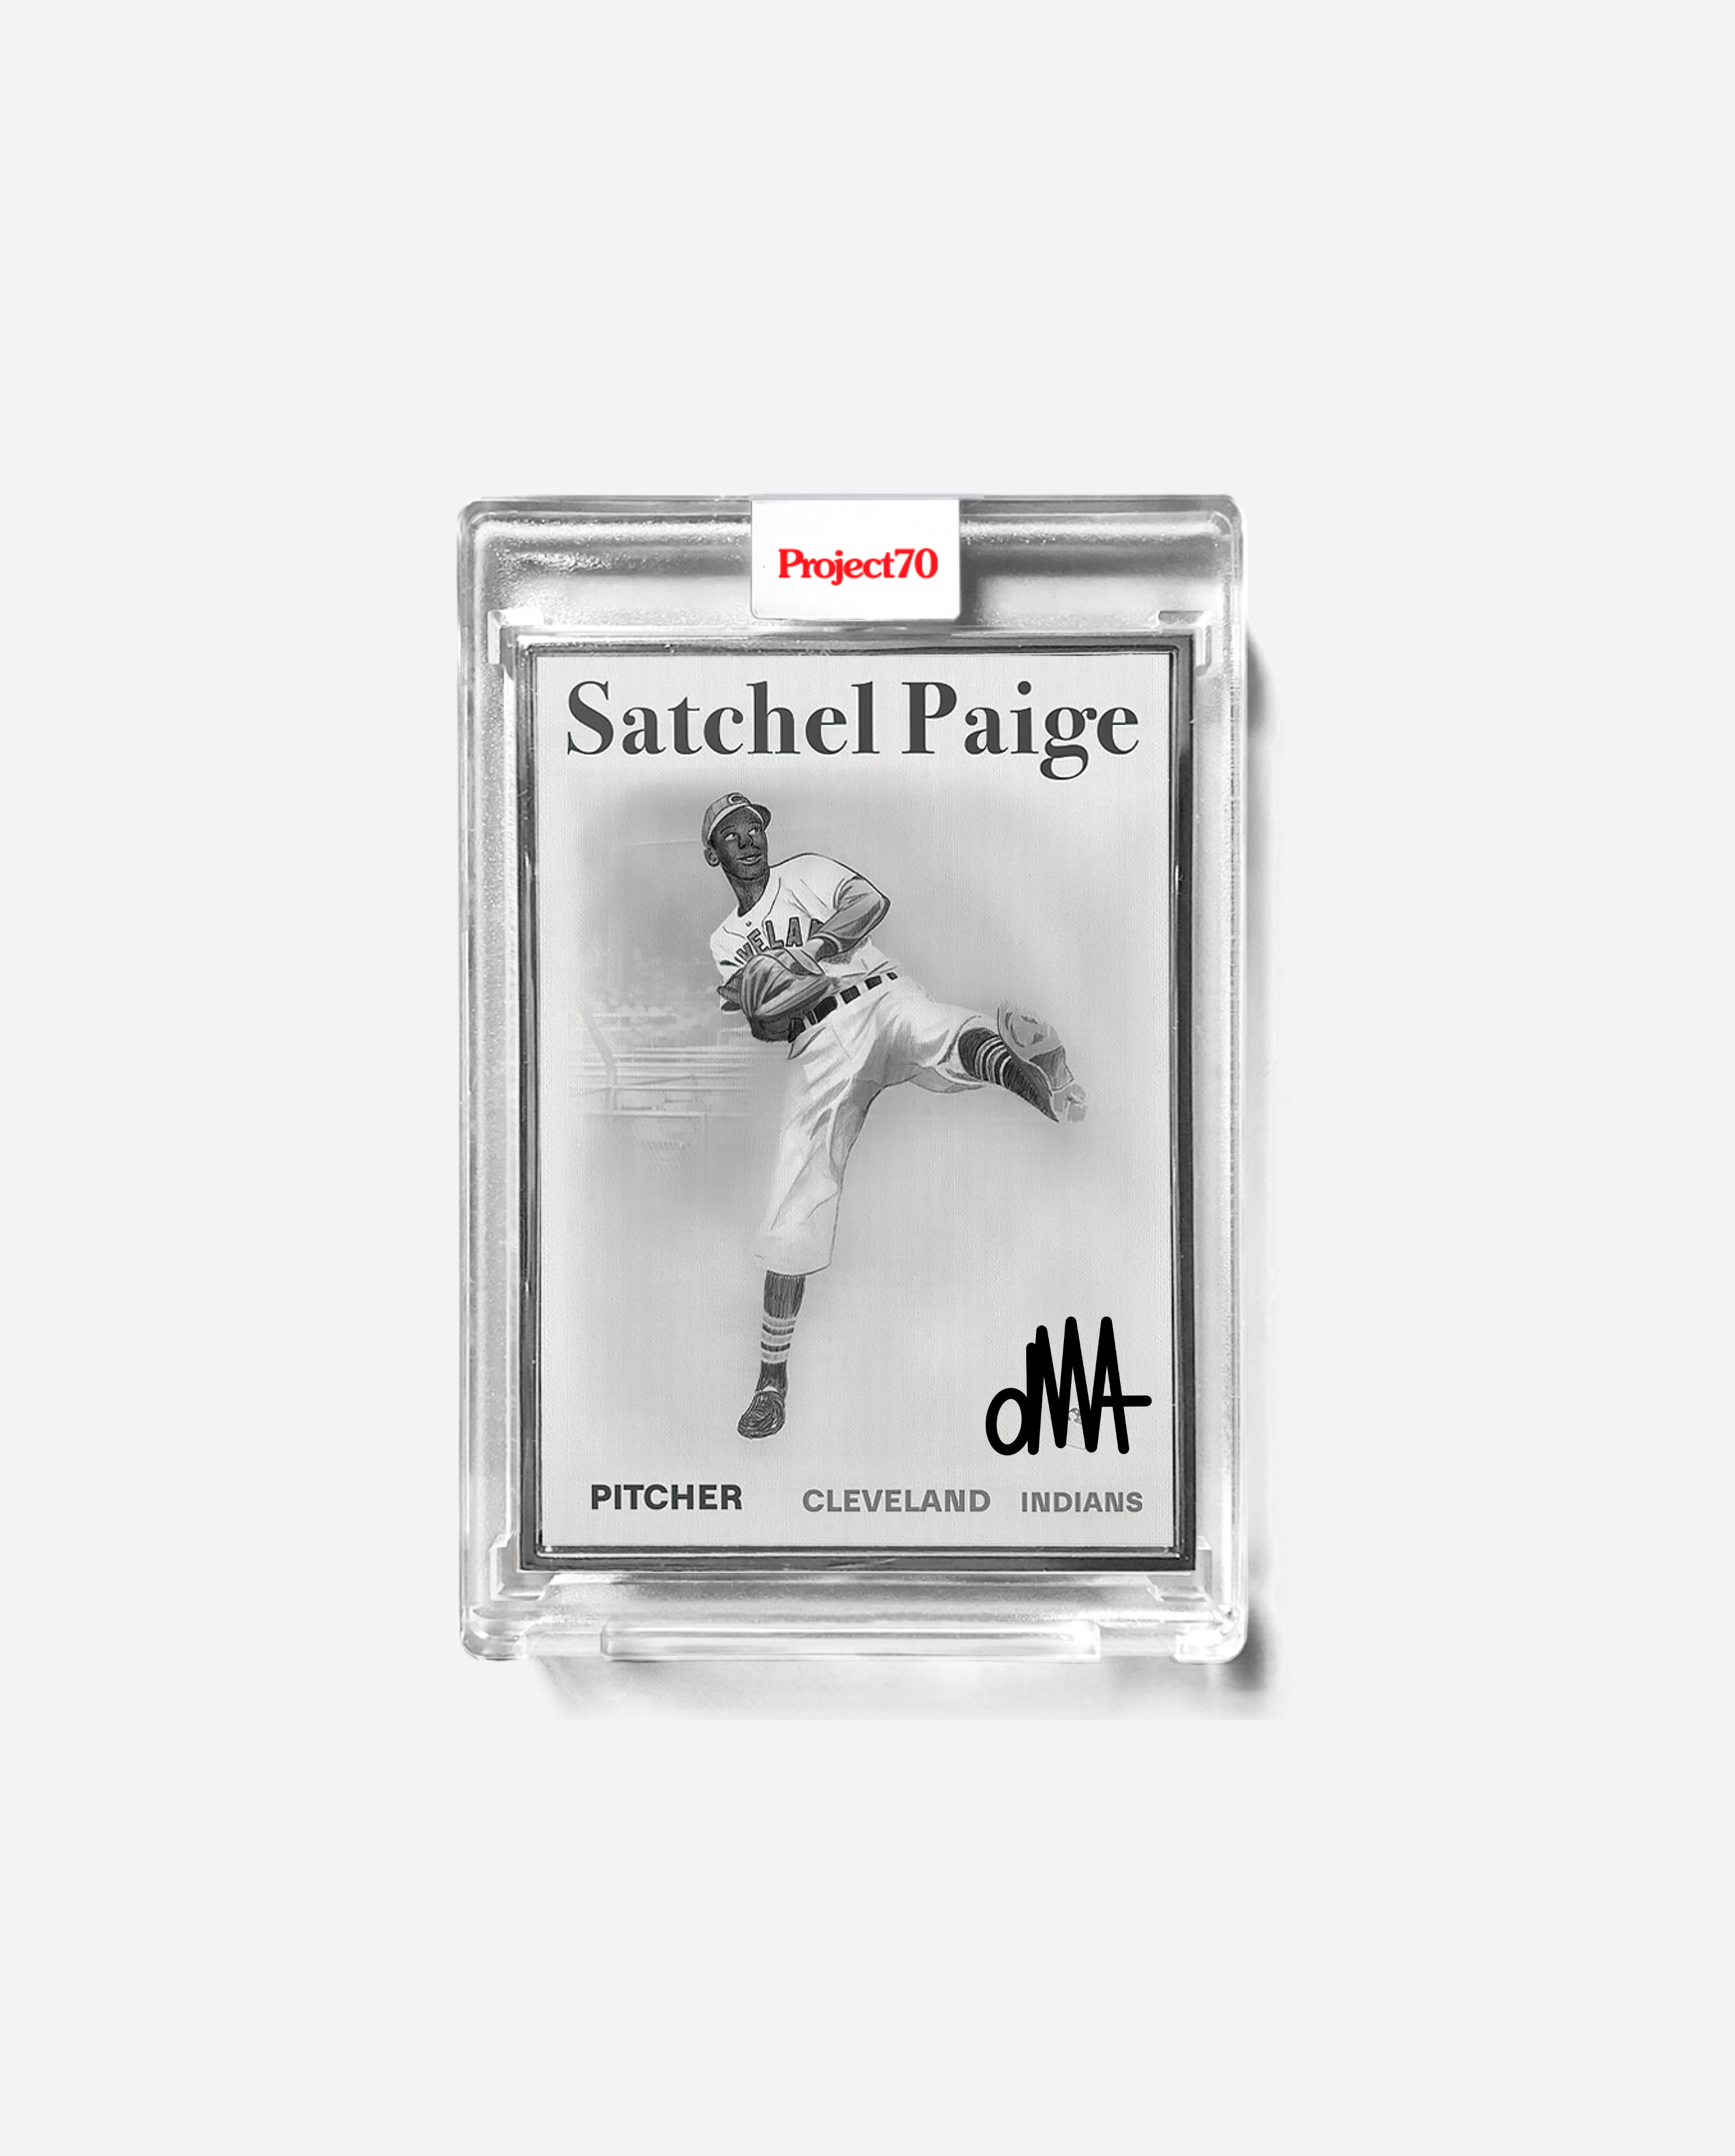 Satchel Paige x oMA x Topps Project 70 Autographed Card (ARTIST PROOF)